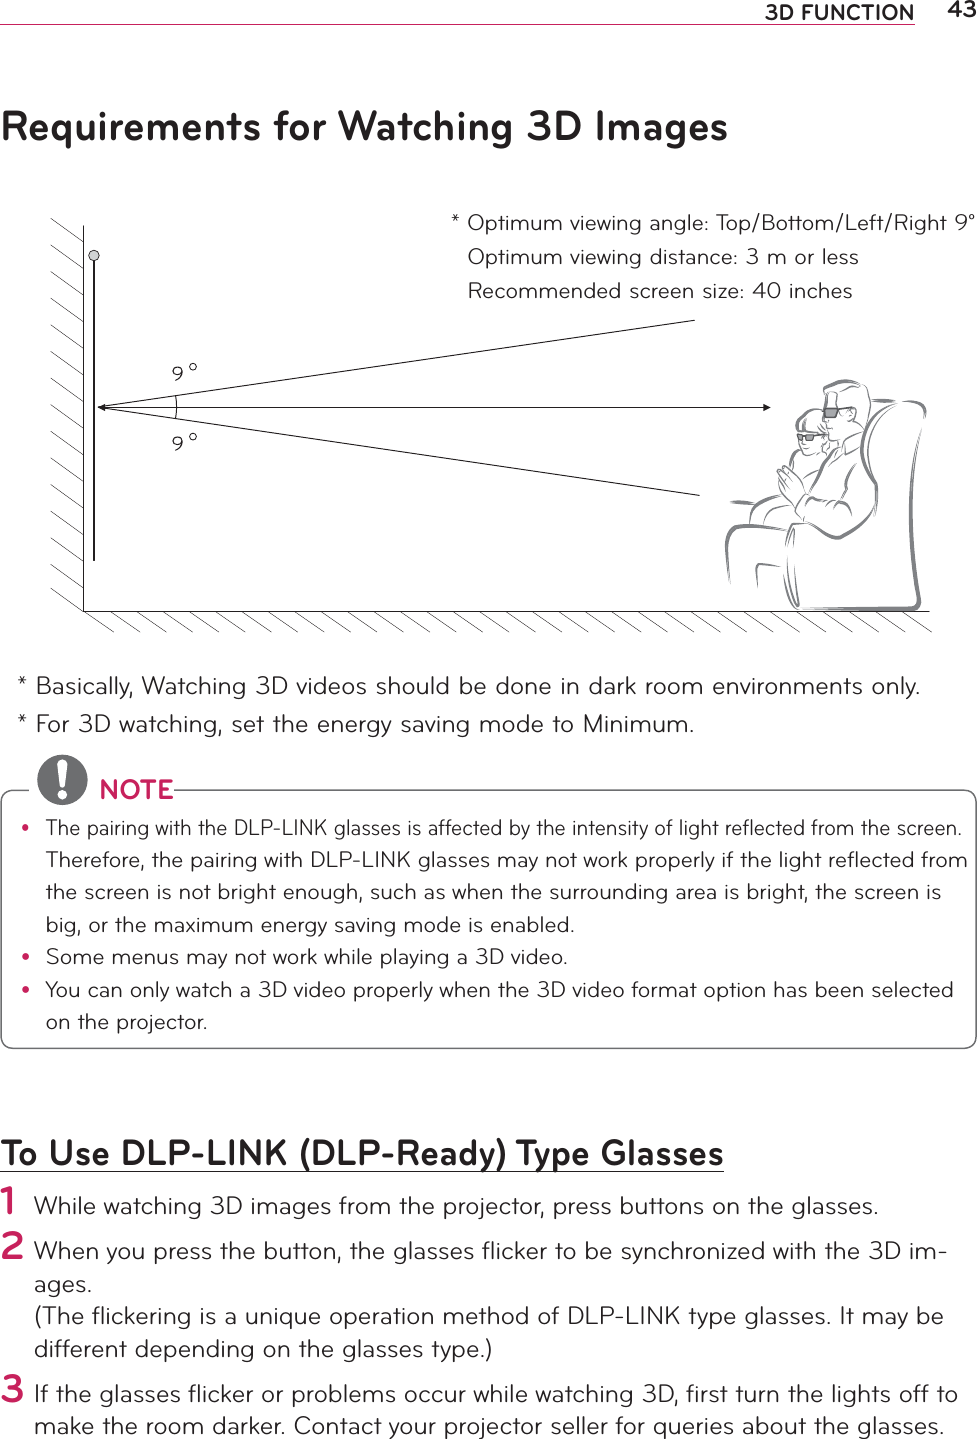 433D FUNCTIONRequirements for Watching 3D Images* Basically, Watching 3D videos should be done in dark room environments only. * For 3D watching, set the energy saving mode to Minimum.To Use DLP-LINK (DLP-Ready) Type Glasses1 While watching 3D images from the projector, press buttons on the glasses.2  When you press the button, the glasses ﬂicker to be synchronized with the 3D im-ages. (The ﬂickering is a unique operation method of DLP-LINK type glasses. It may be different depending on the glasses type.) 3 If the glasses ﬂicker or problems occur while watching 3D, ﬁrst turn the lights off to make the room darker. Contact your projector seller for queries about the glasses.  *  Optimum viewing angle: Top/Bottom/Left/Right 9°Optimum viewing distance: 3 m or lessRecommended screen size: 40 inches NOTEy The pairing with the DLP-LINK glasses is affected by the intensity of light reflected from the screen. Therefore, the pairing with DLP-LINK glasses may not work properly if the light reflected from the screen is not bright enough, such as when the surrounding area is bright, the screen is big, or the maximum energy saving mode is enabled.y  Some menus may not work while playing a 3D video.y You can only watch a 3D video properly when the 3D video format option has been selected on the projector.